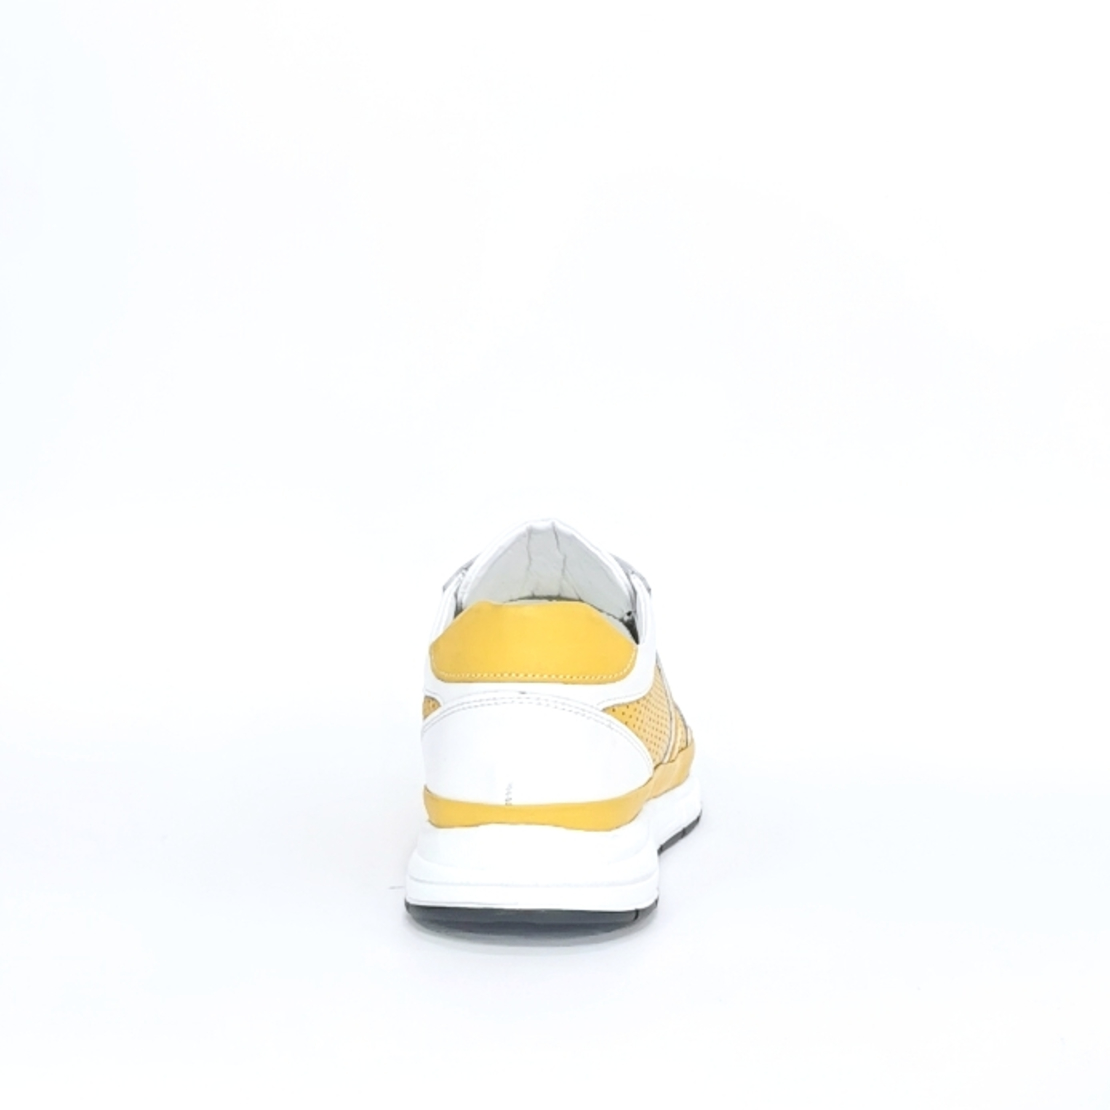 Men s  sneakers made of natural leather in the color white + yellow 7206